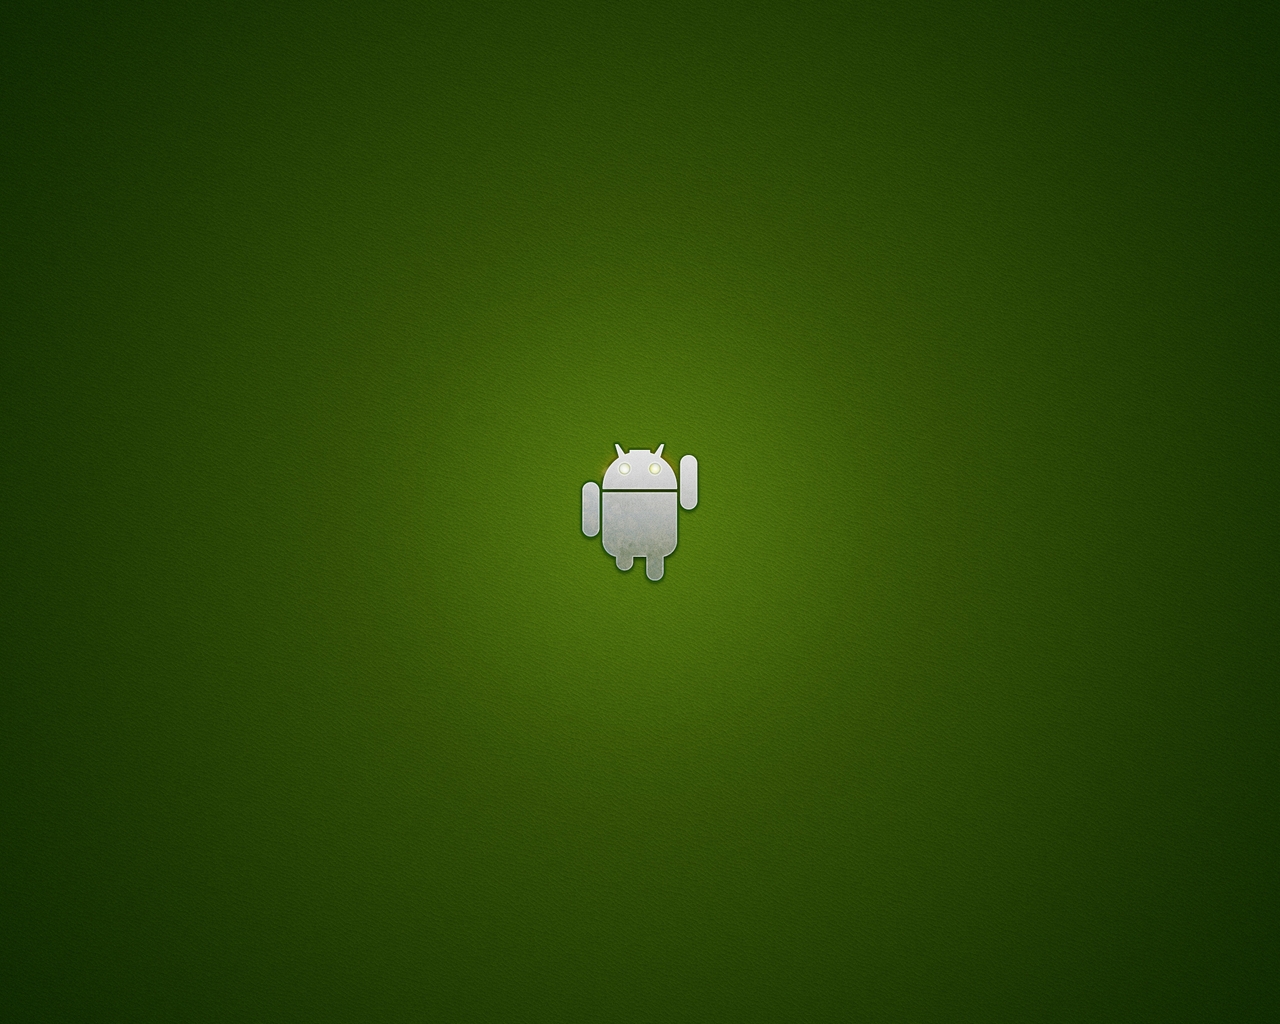 Just Android for 1280 x 1024 resolution